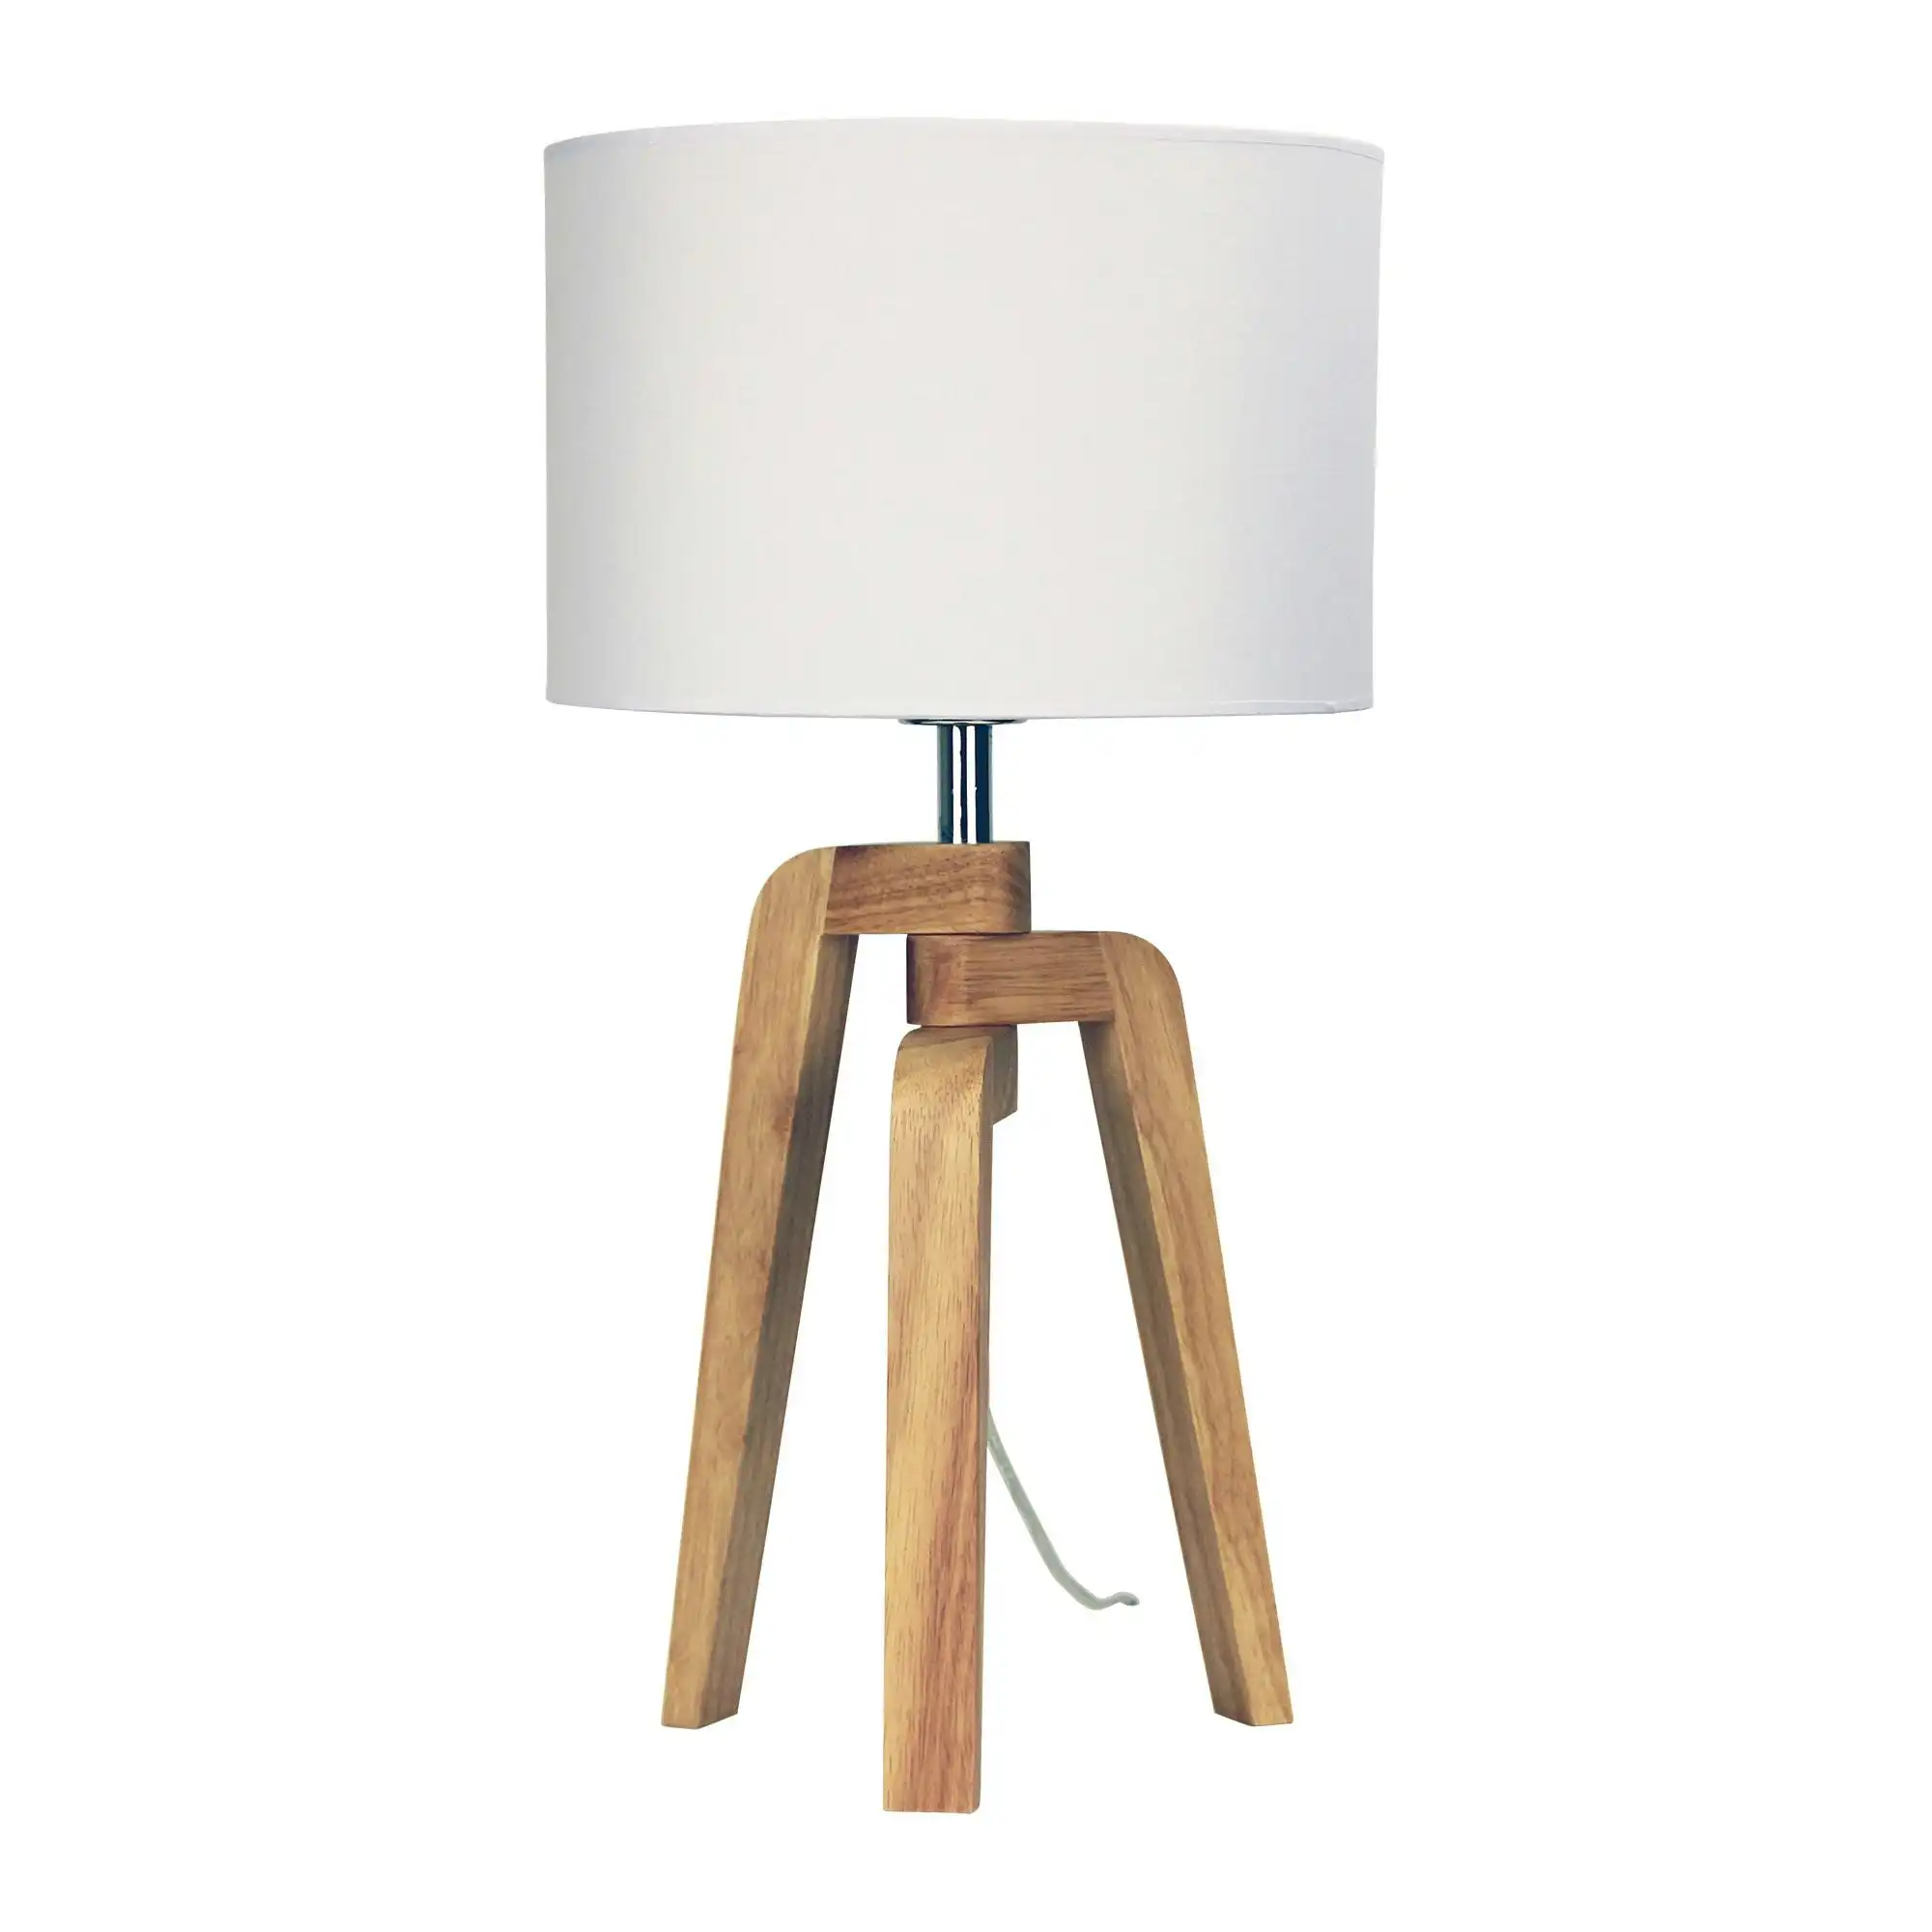 LUND TABLE LAMP Scandi Inspired Timber Tripod Lamp with Shade